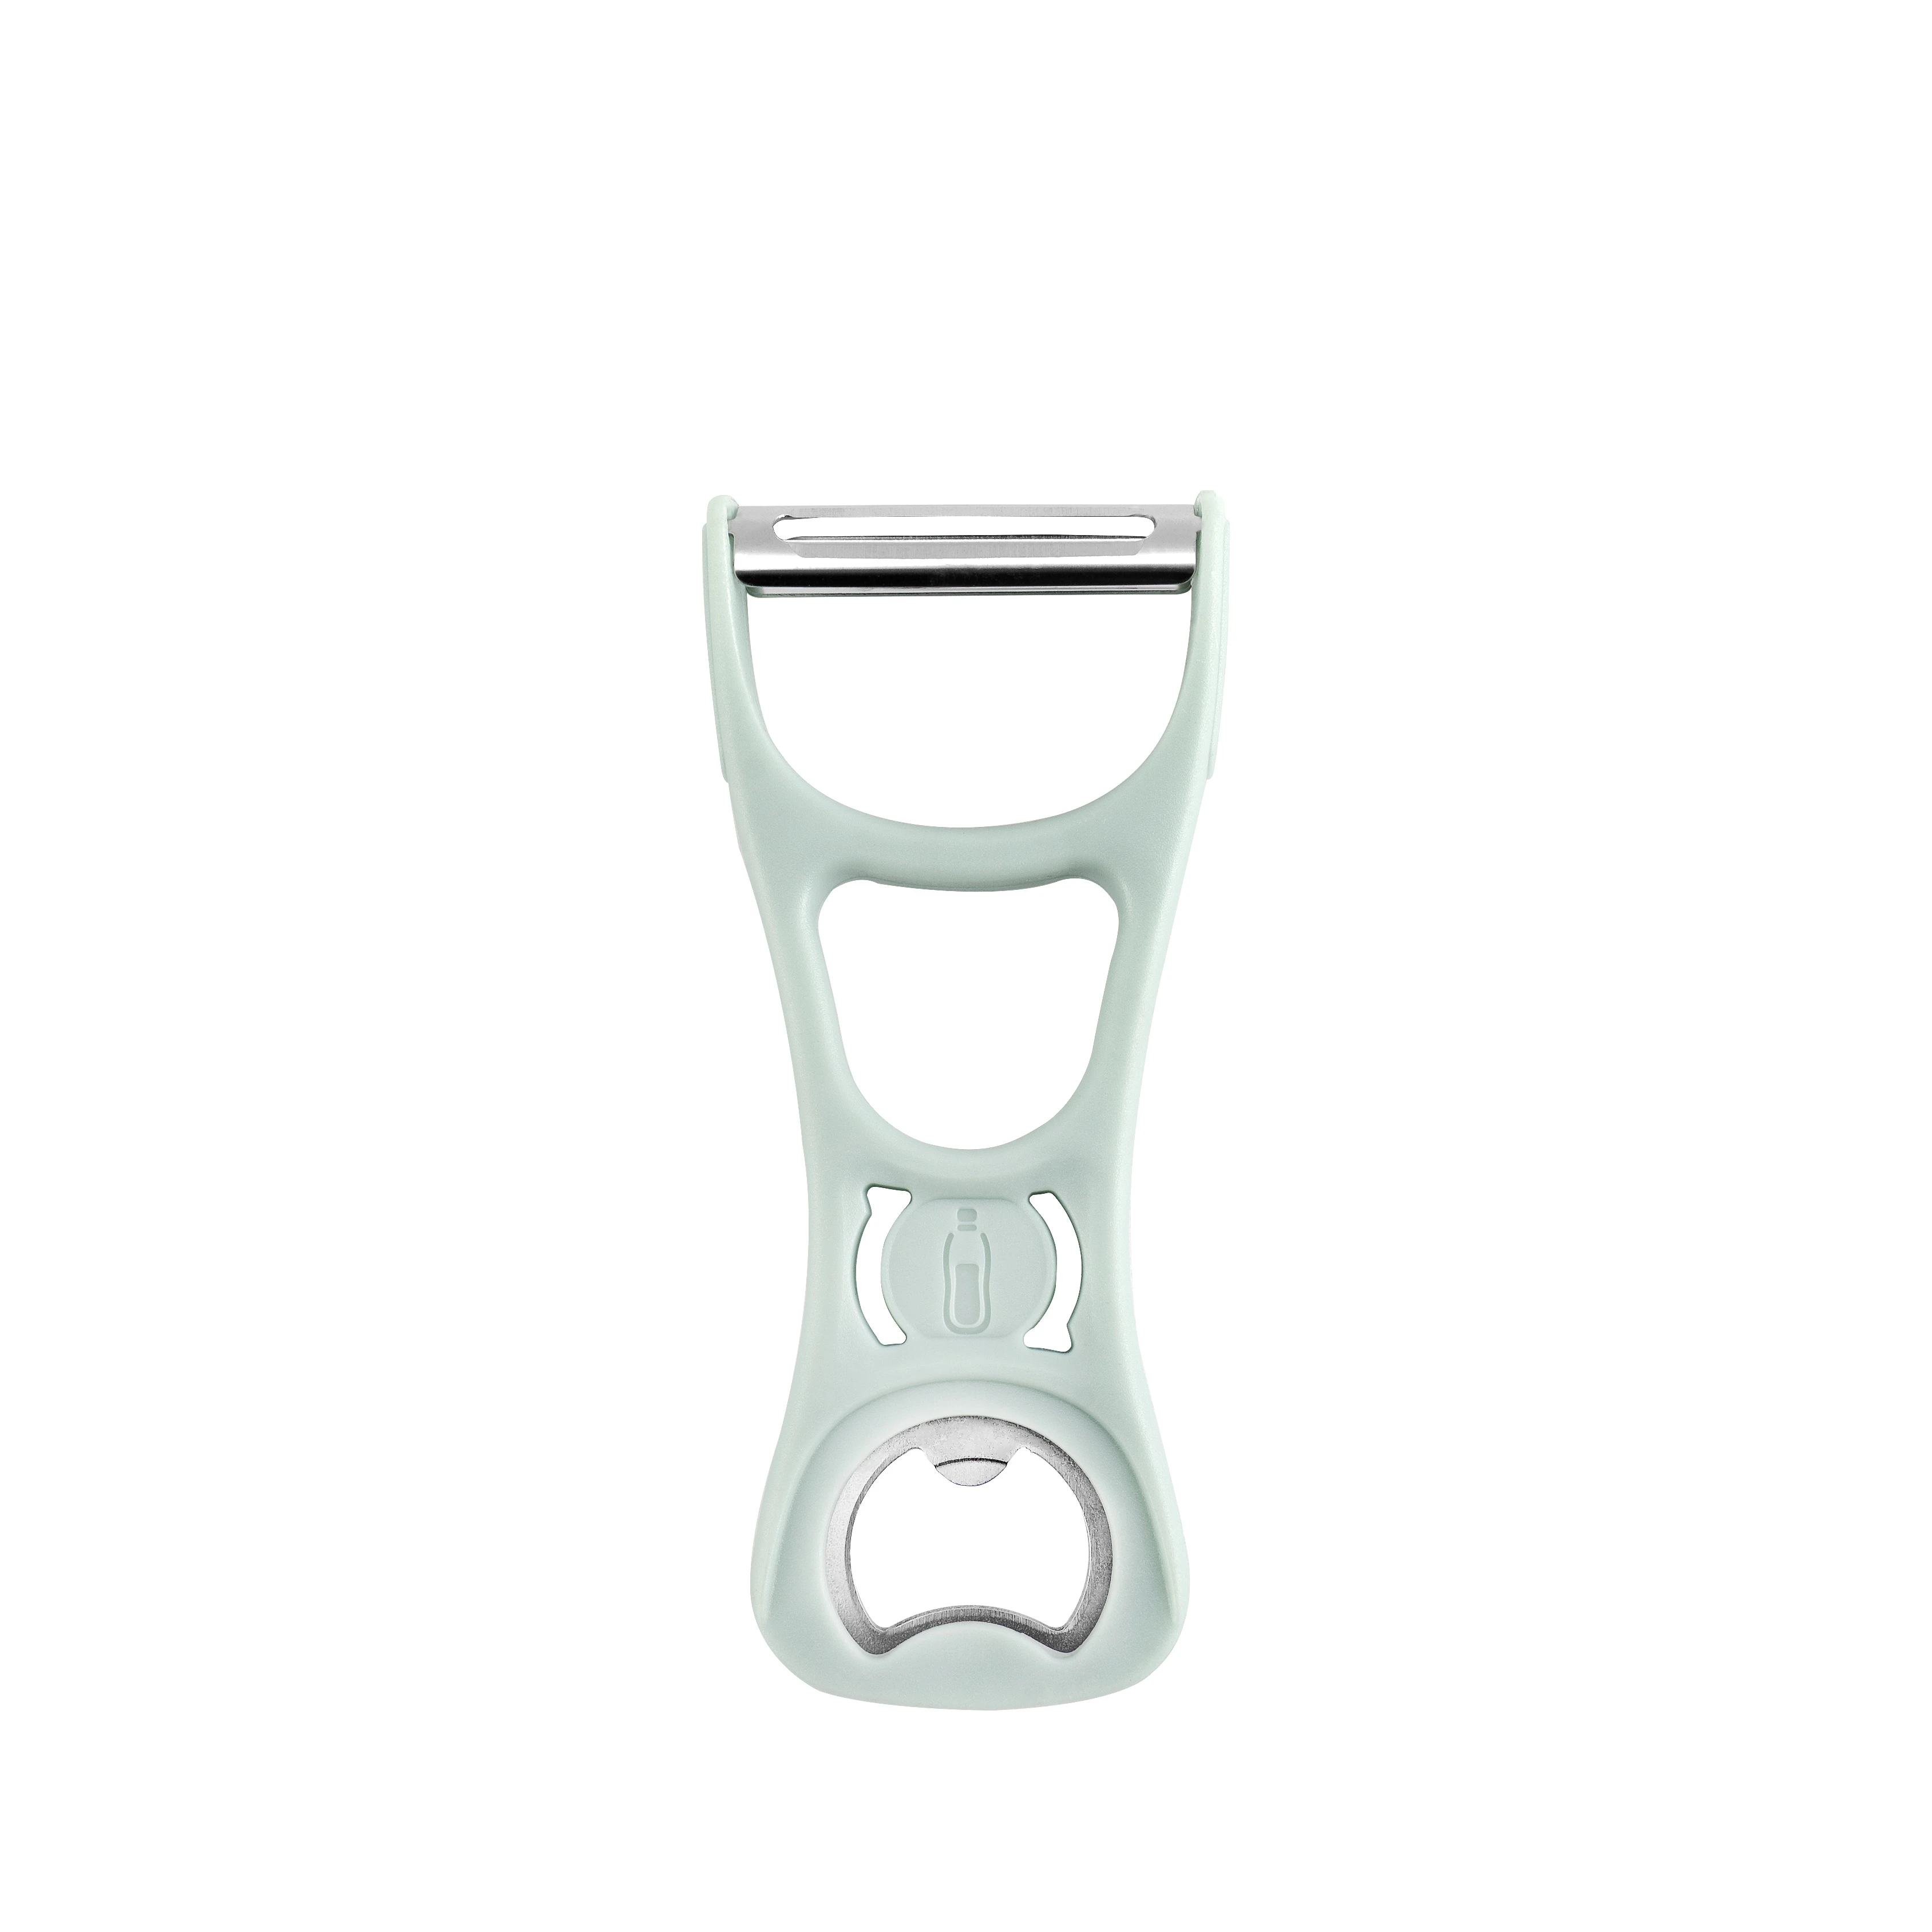 Innovative and practical cyan color three shapes kitchen gadget multifunctional 2 in 1 vegetable peeler/bottle opener